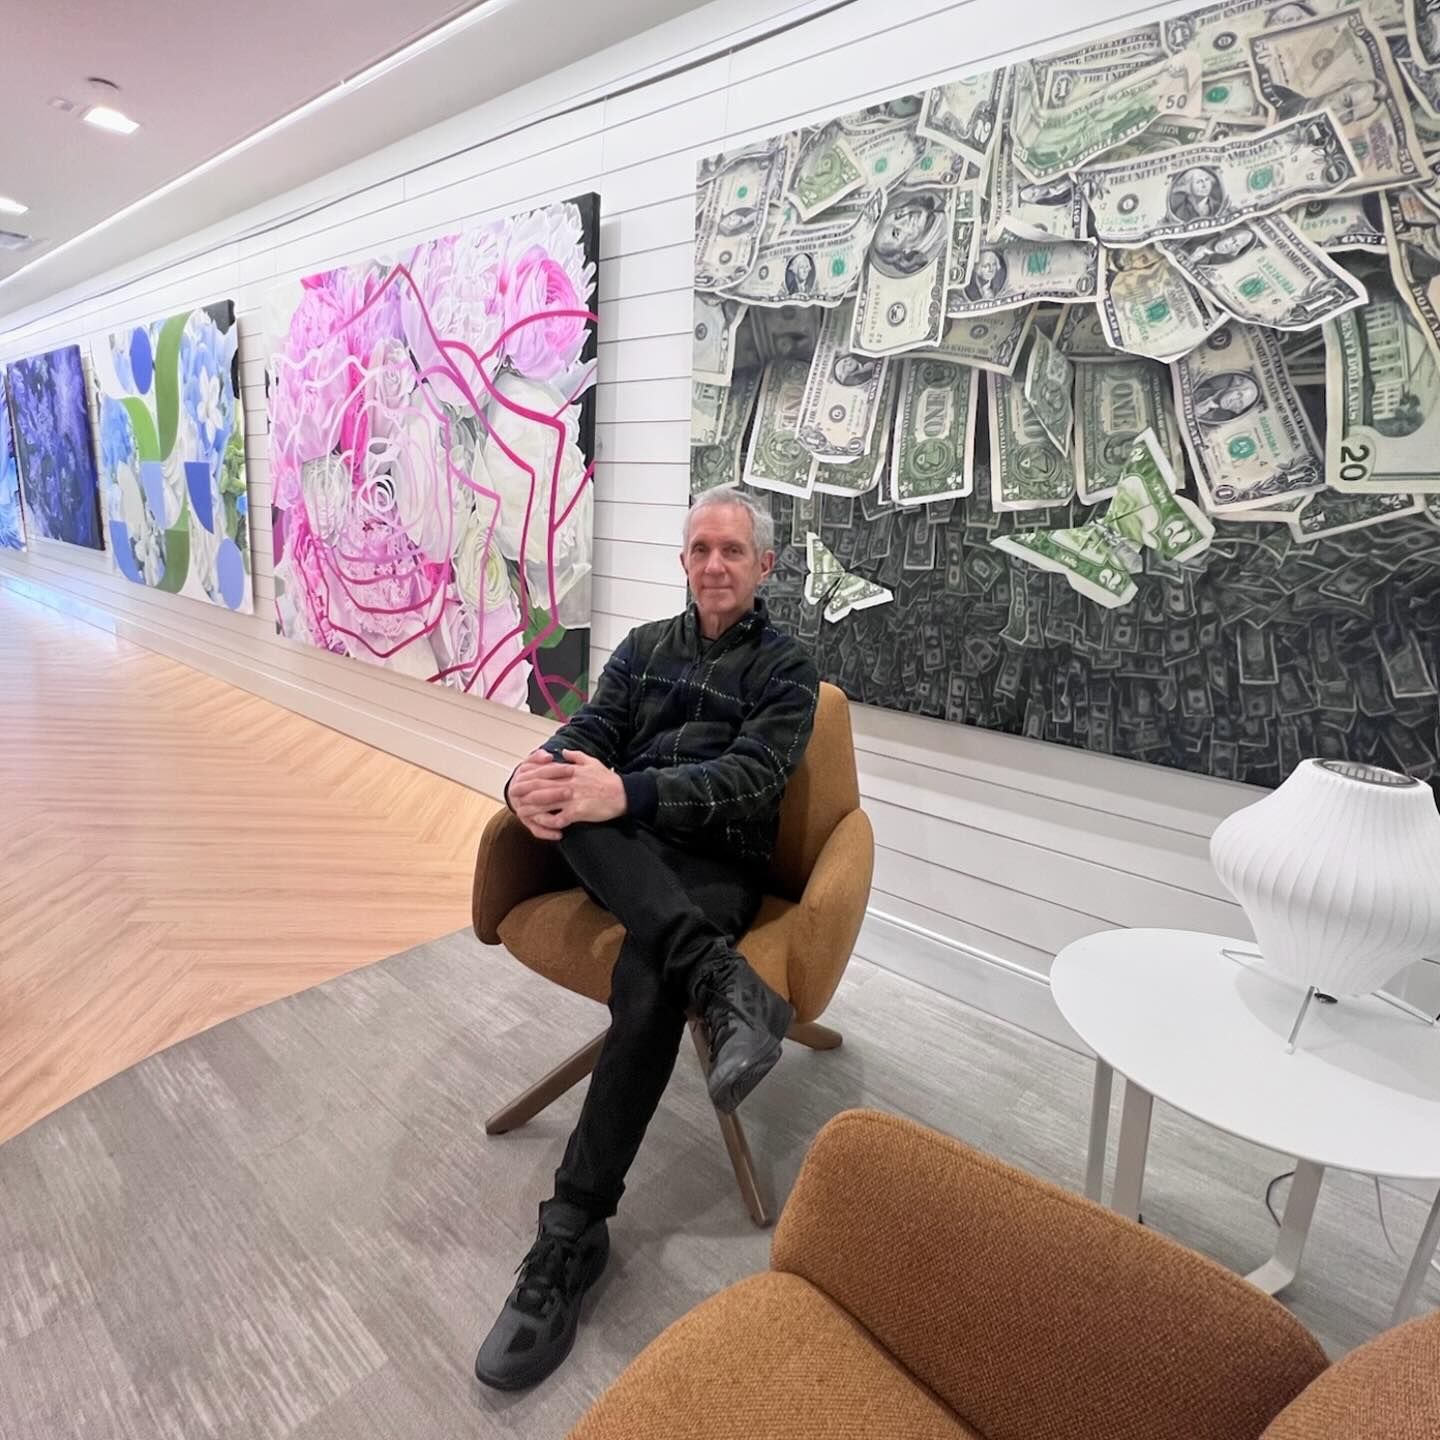 Charles Wildbank at M&T Bank in Westhampton Beach, where East End Arts has arranged an exhibition of his large-scale abstract photorealism paintings.